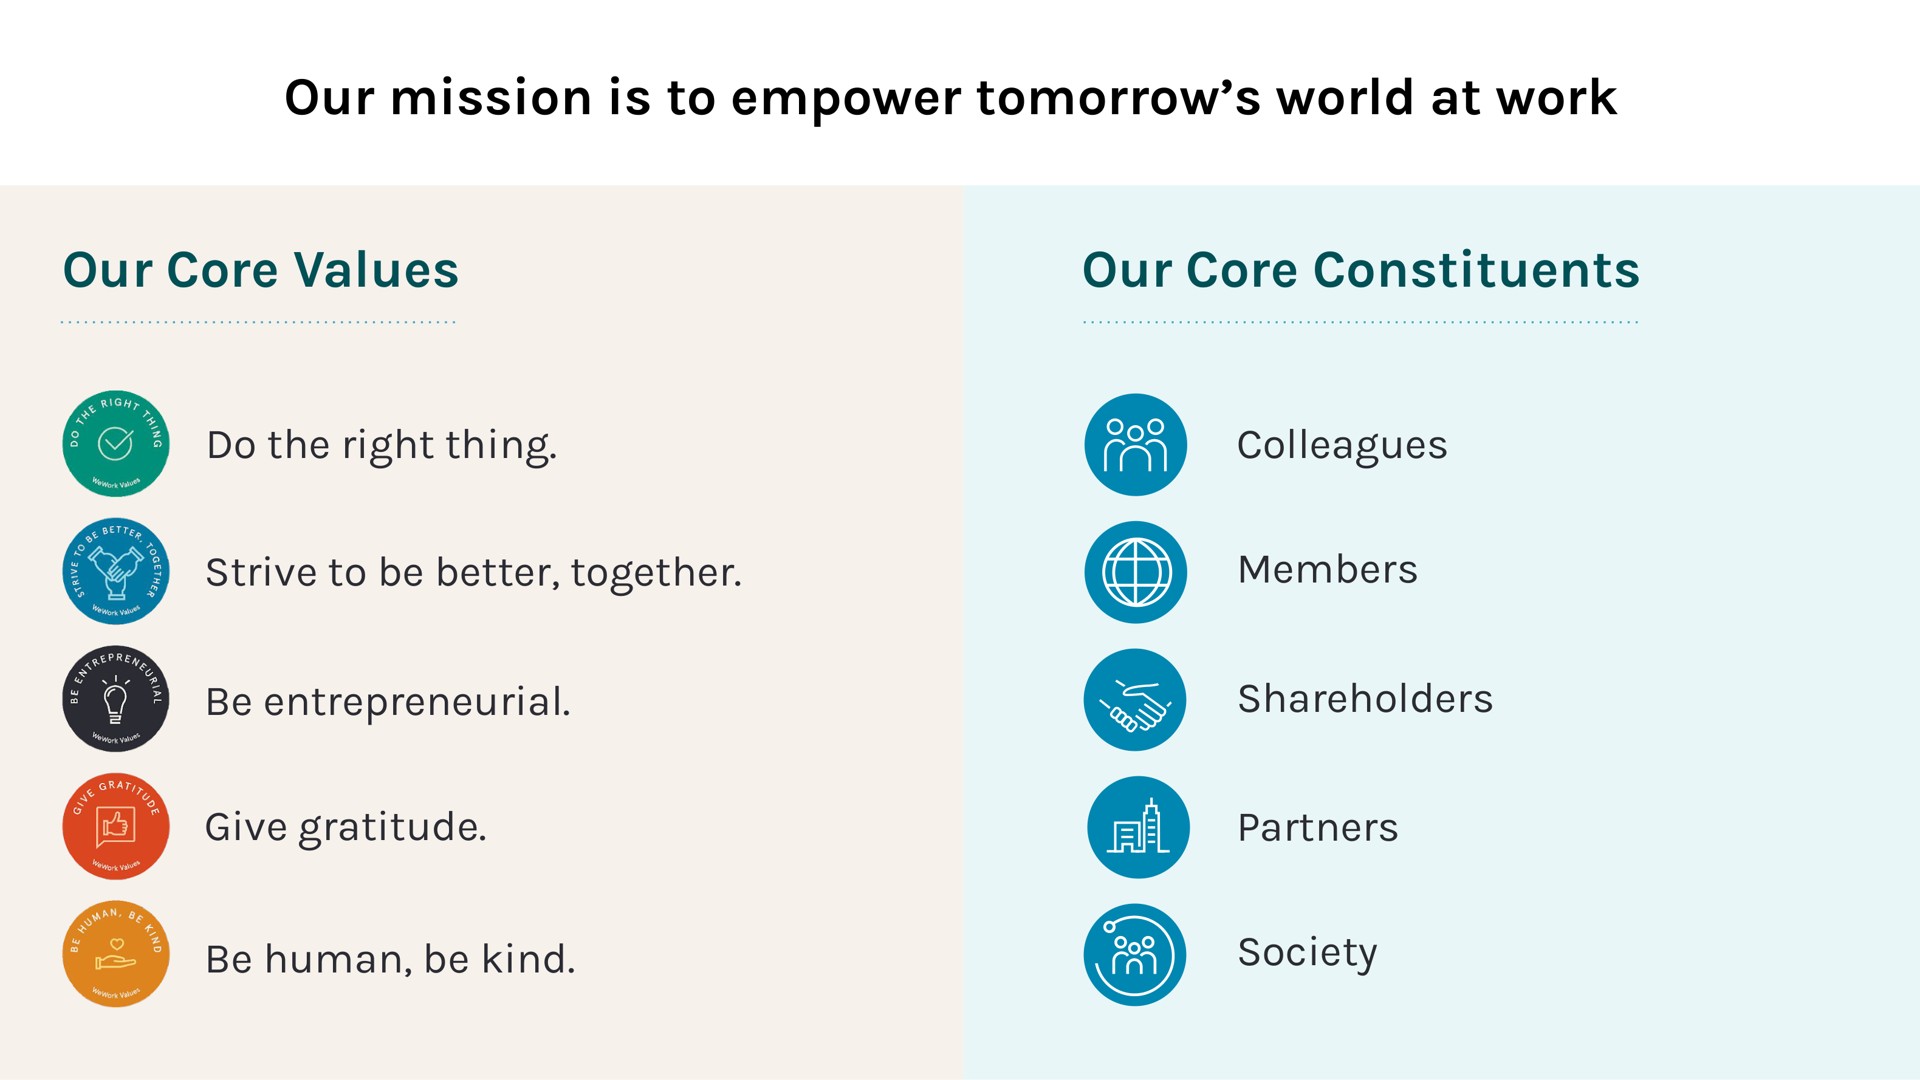 our mission is to empower tomorrow world at work our core values our core constituents do the right thing strive to be better together be entrepreneurial give gratitude be human be kind colleagues members shareholders partners society | WeWork